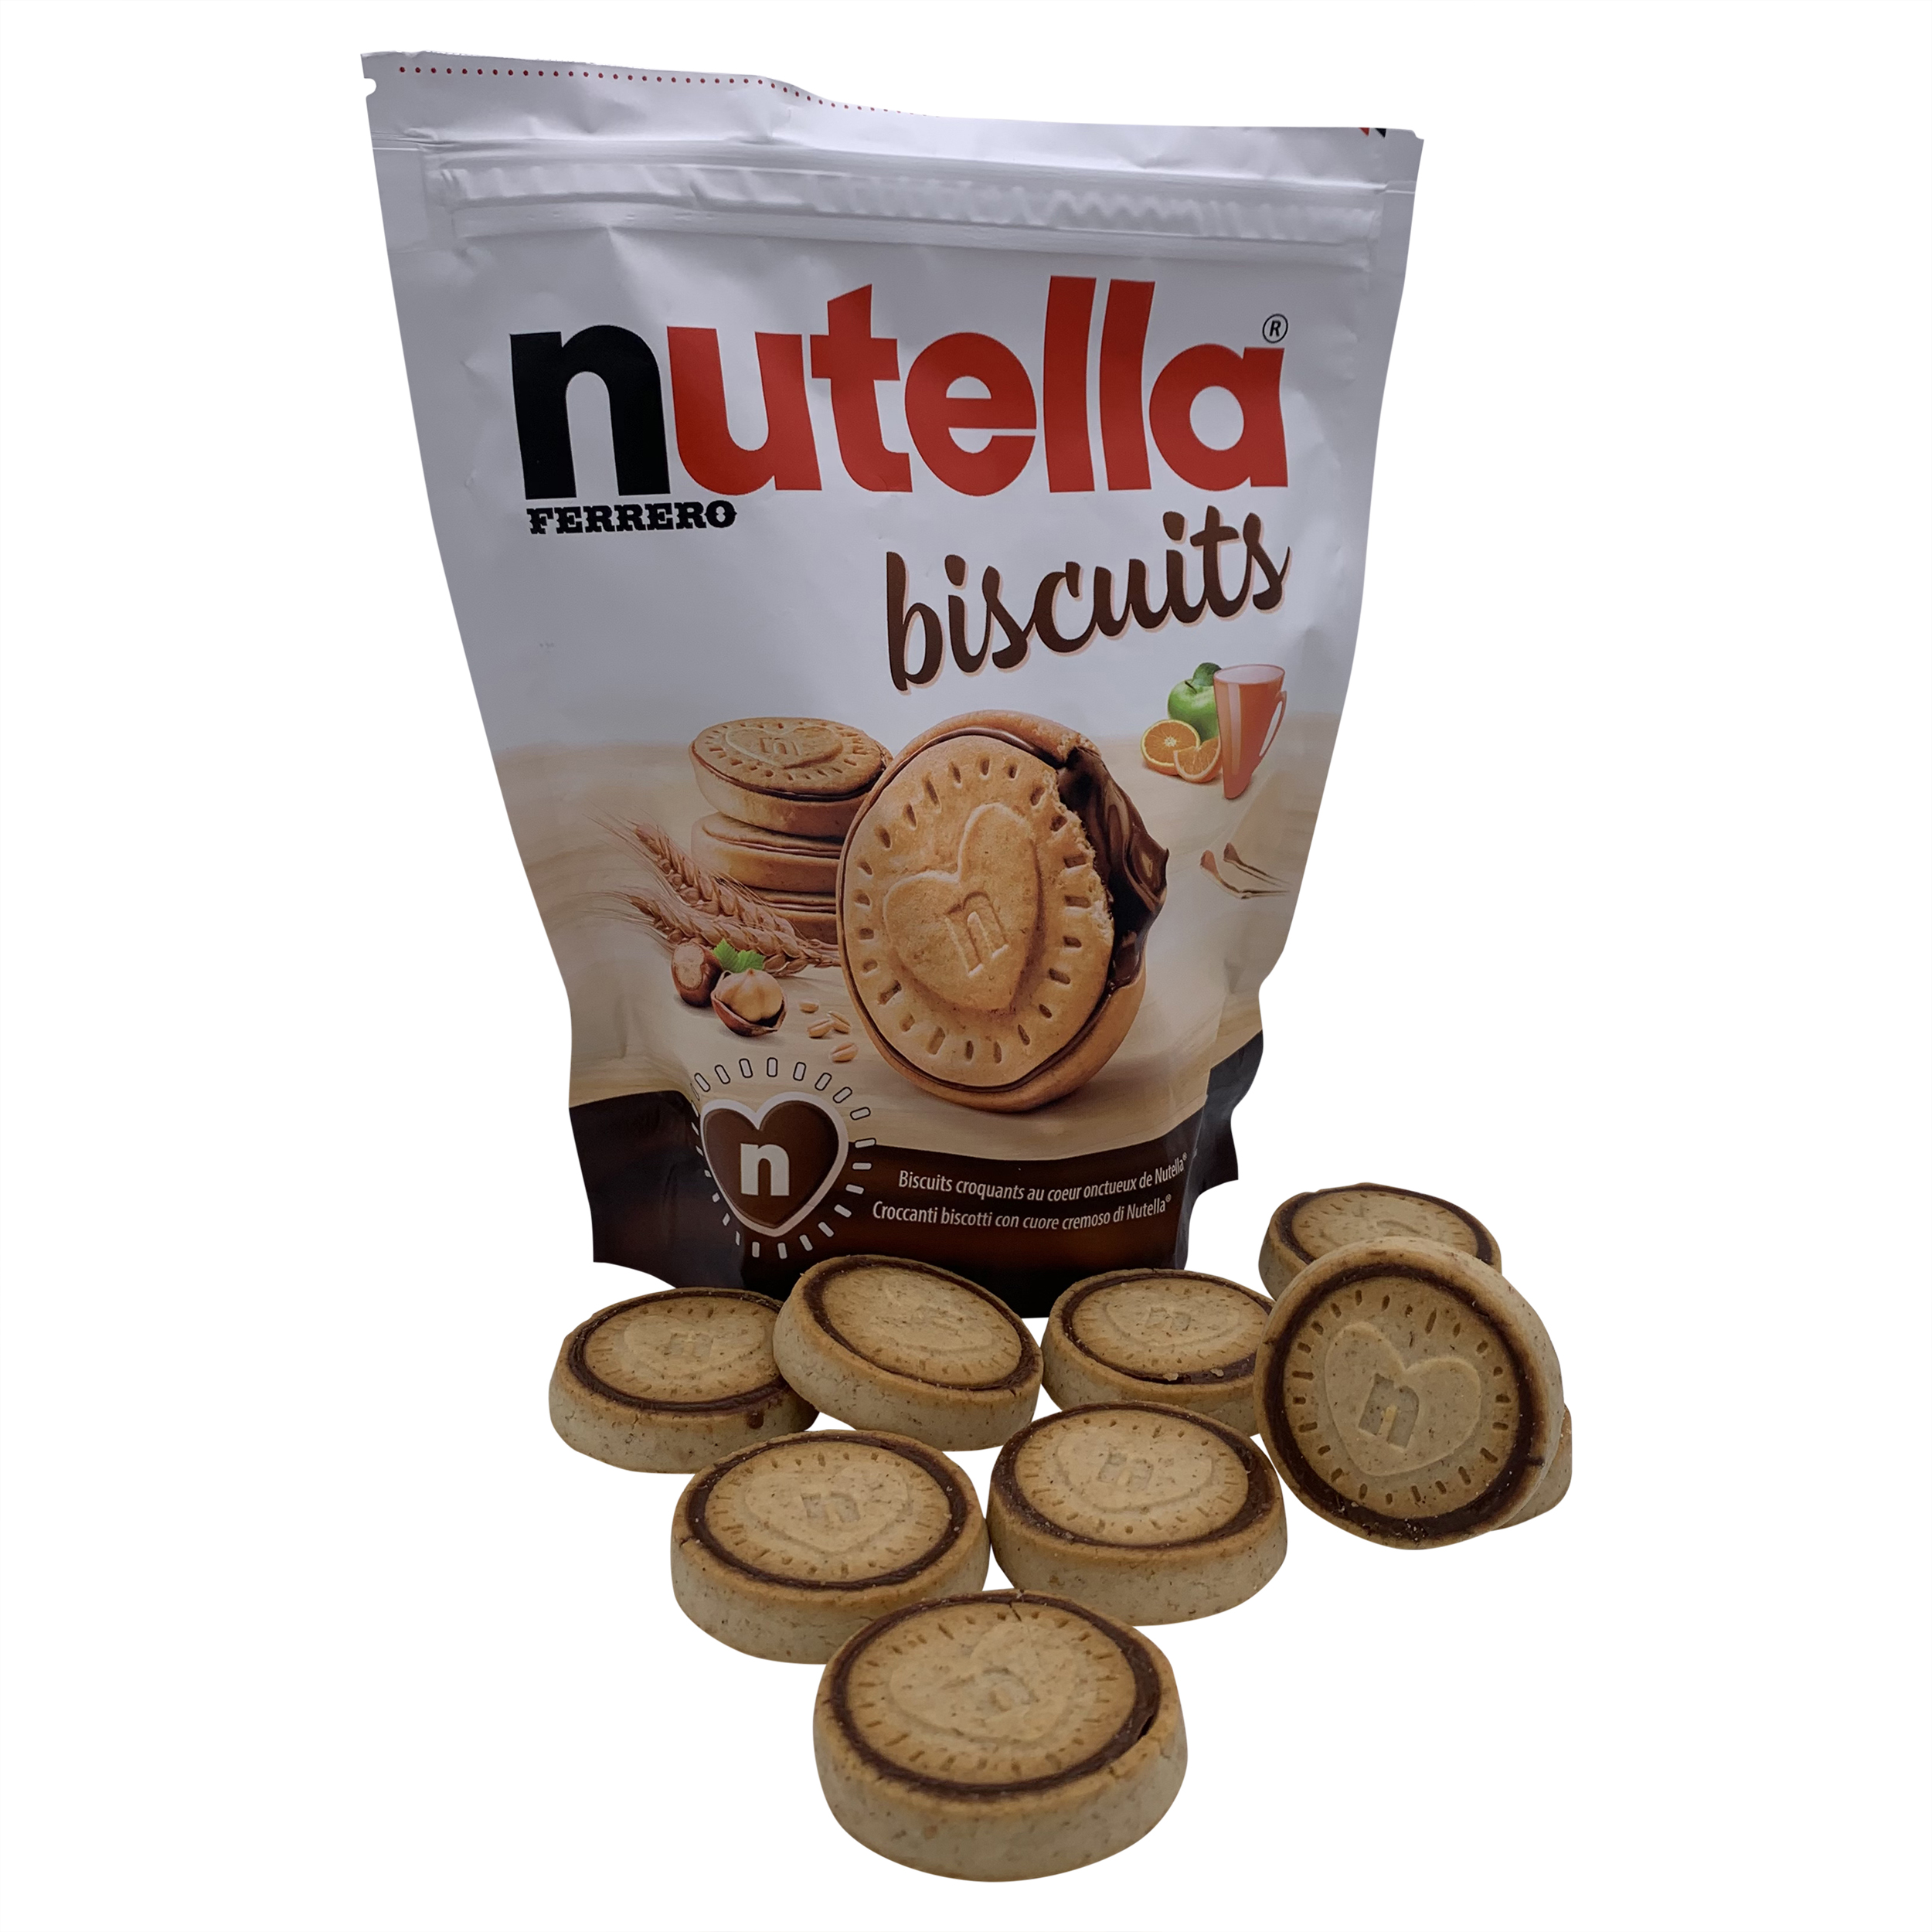 SPOTTED: Ferrero Nutella Biscuits - The Impulsive Buy